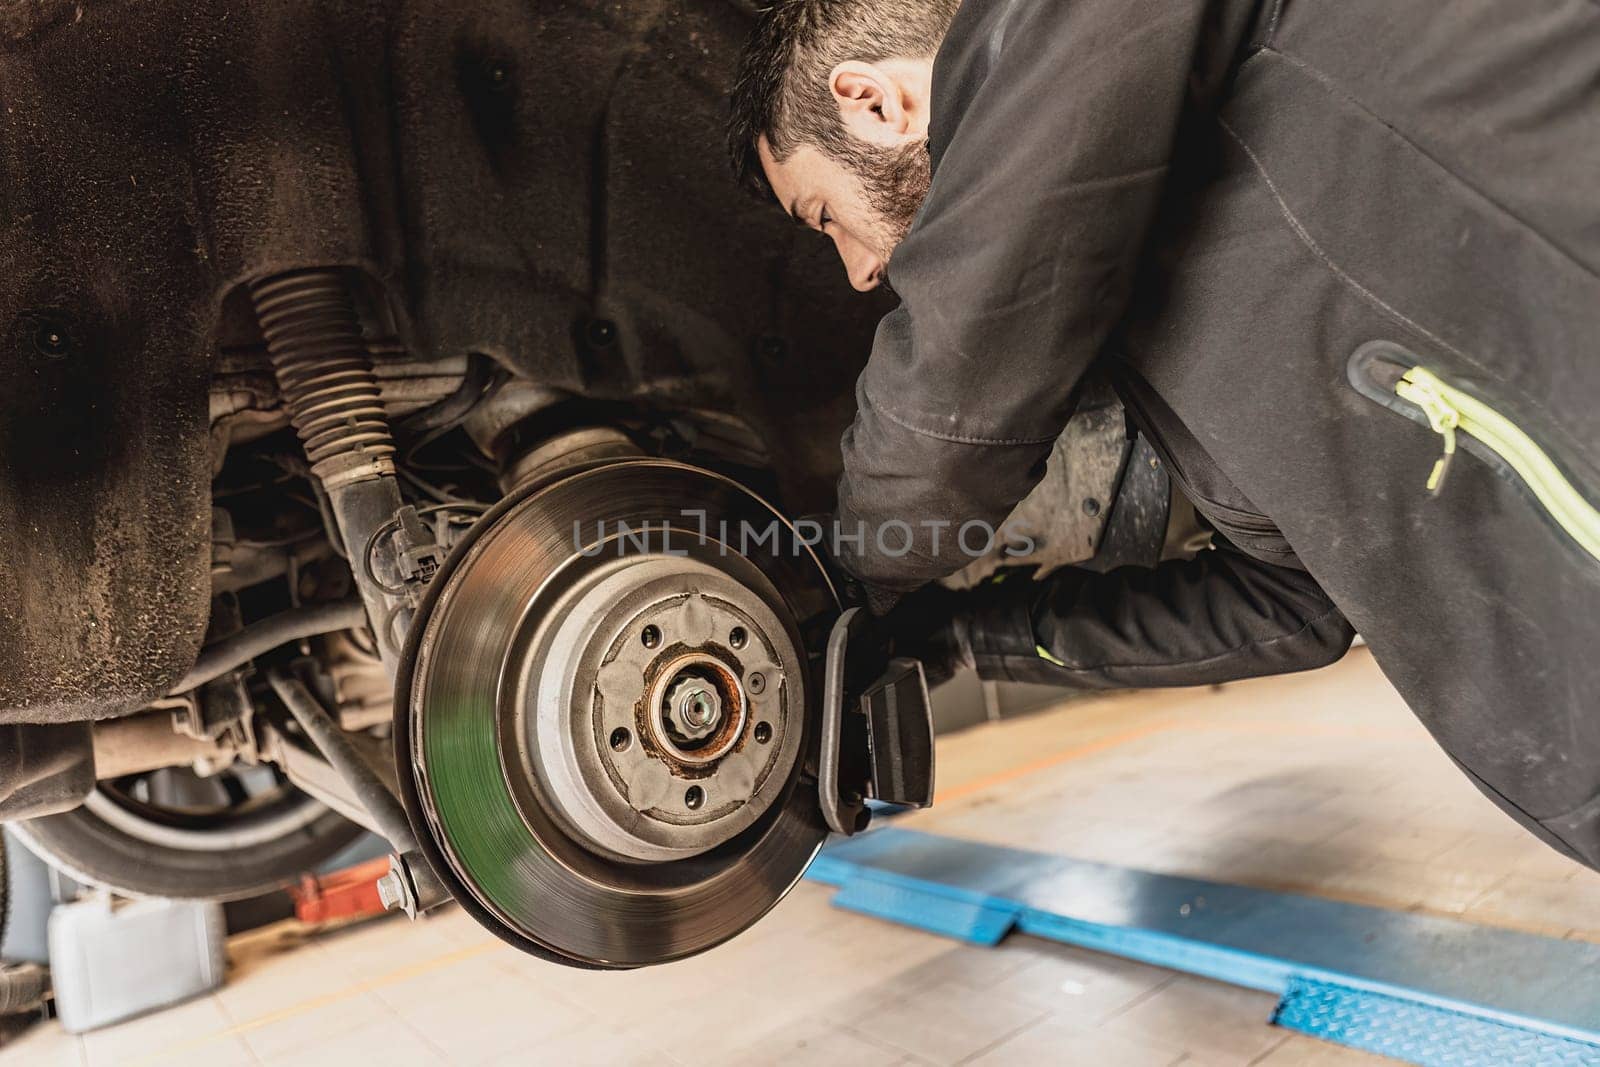 Skilled mechanic expertly replaces brake pads on a car with precision and care.